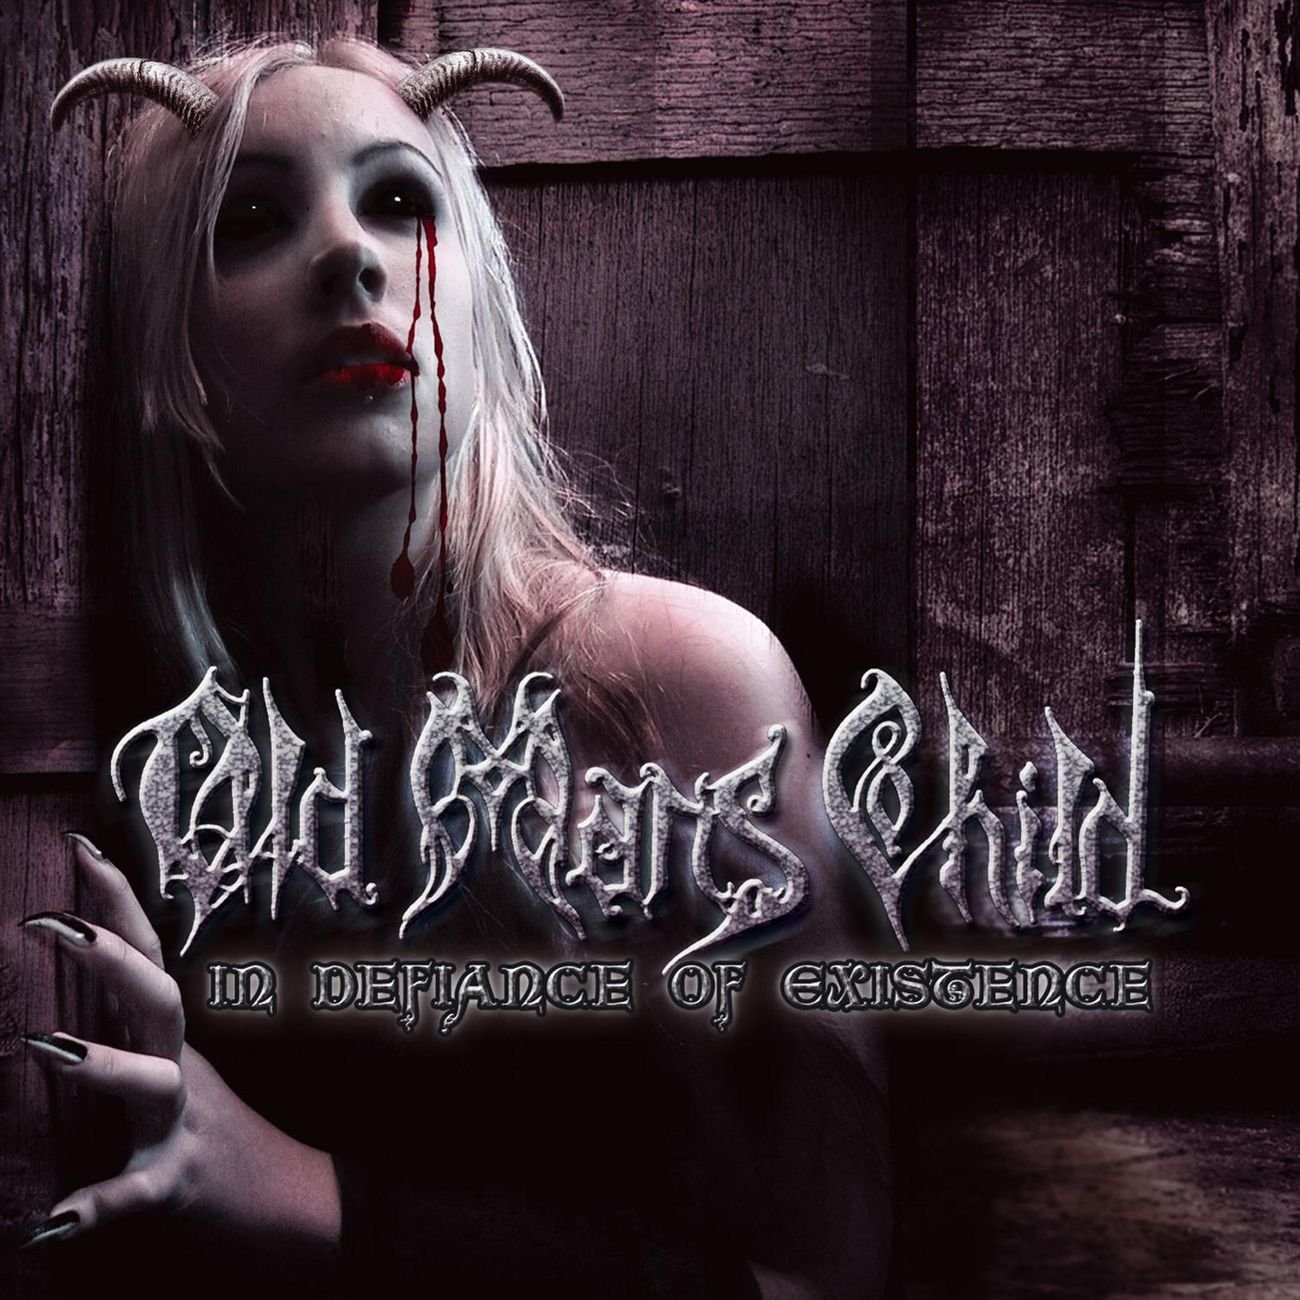 Old man child. Old man's child in Defiance of existence CD. Old mans child 2003 in Defiance of existence.